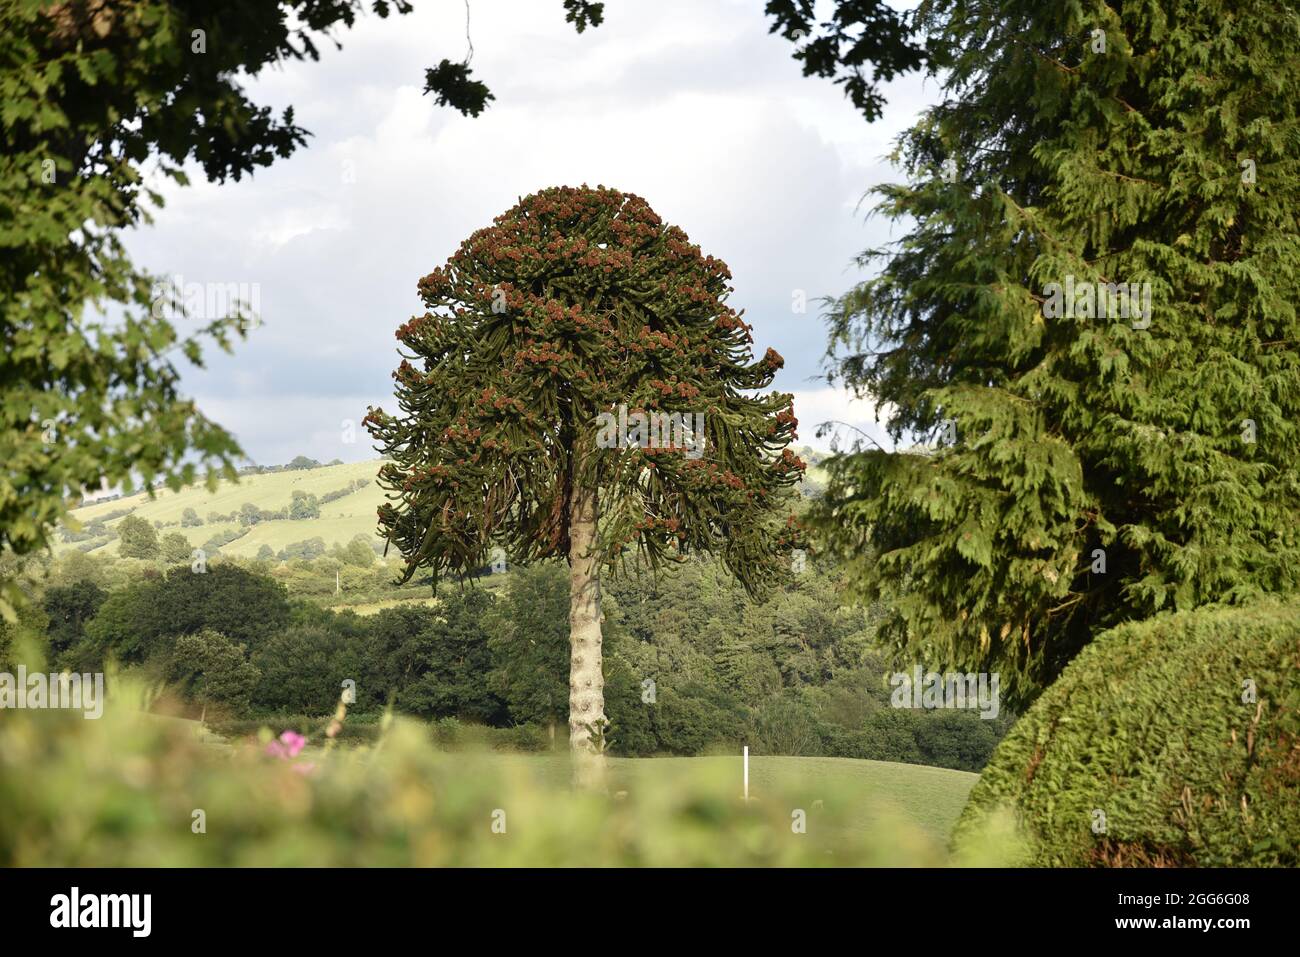 Landscape Image of a Flowering Monkey Puzzle Tree (Araucaria araucana) Framed by Green Trees and Hedges, Set Against a Welsh Countryside Background Stock Photo